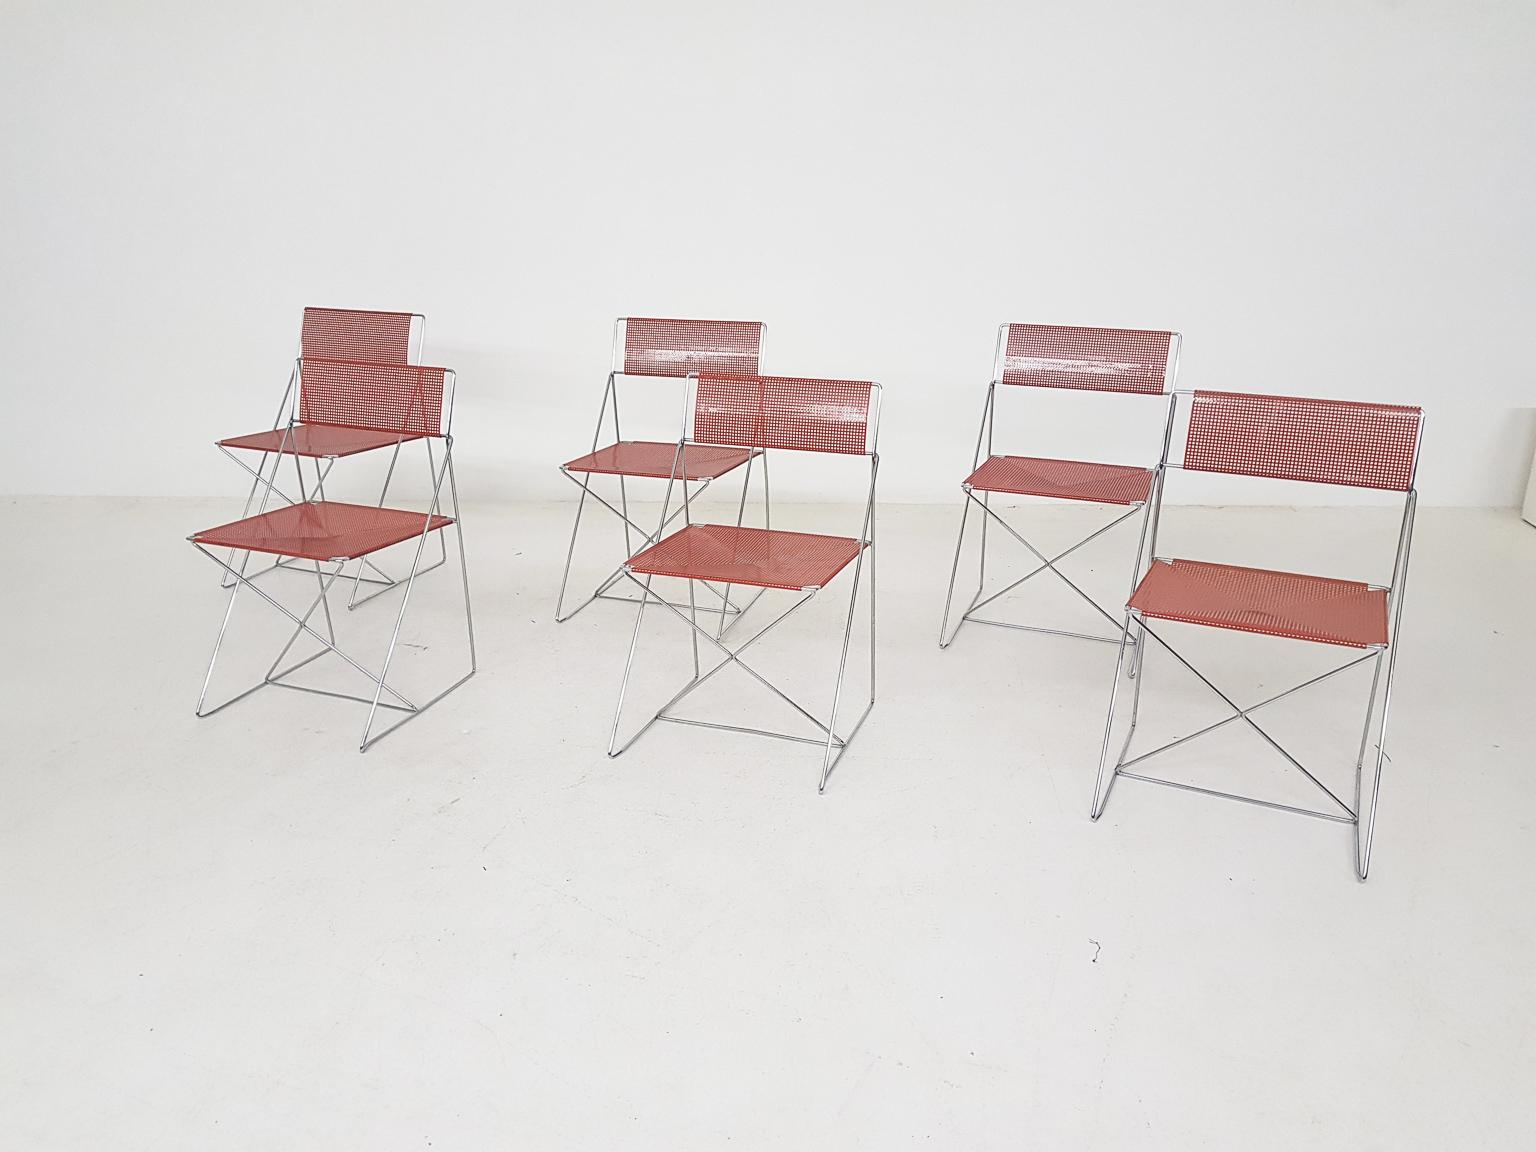 Danish modern X-line stacking or dining chairs by Niels Jørgen Haugesen for Hybodan, made and designed in Denmark in 1977.

Geometric Scandinavian modern wire frame dining chairs. Items are from the X-line series by Danish designer Niels Jørgen